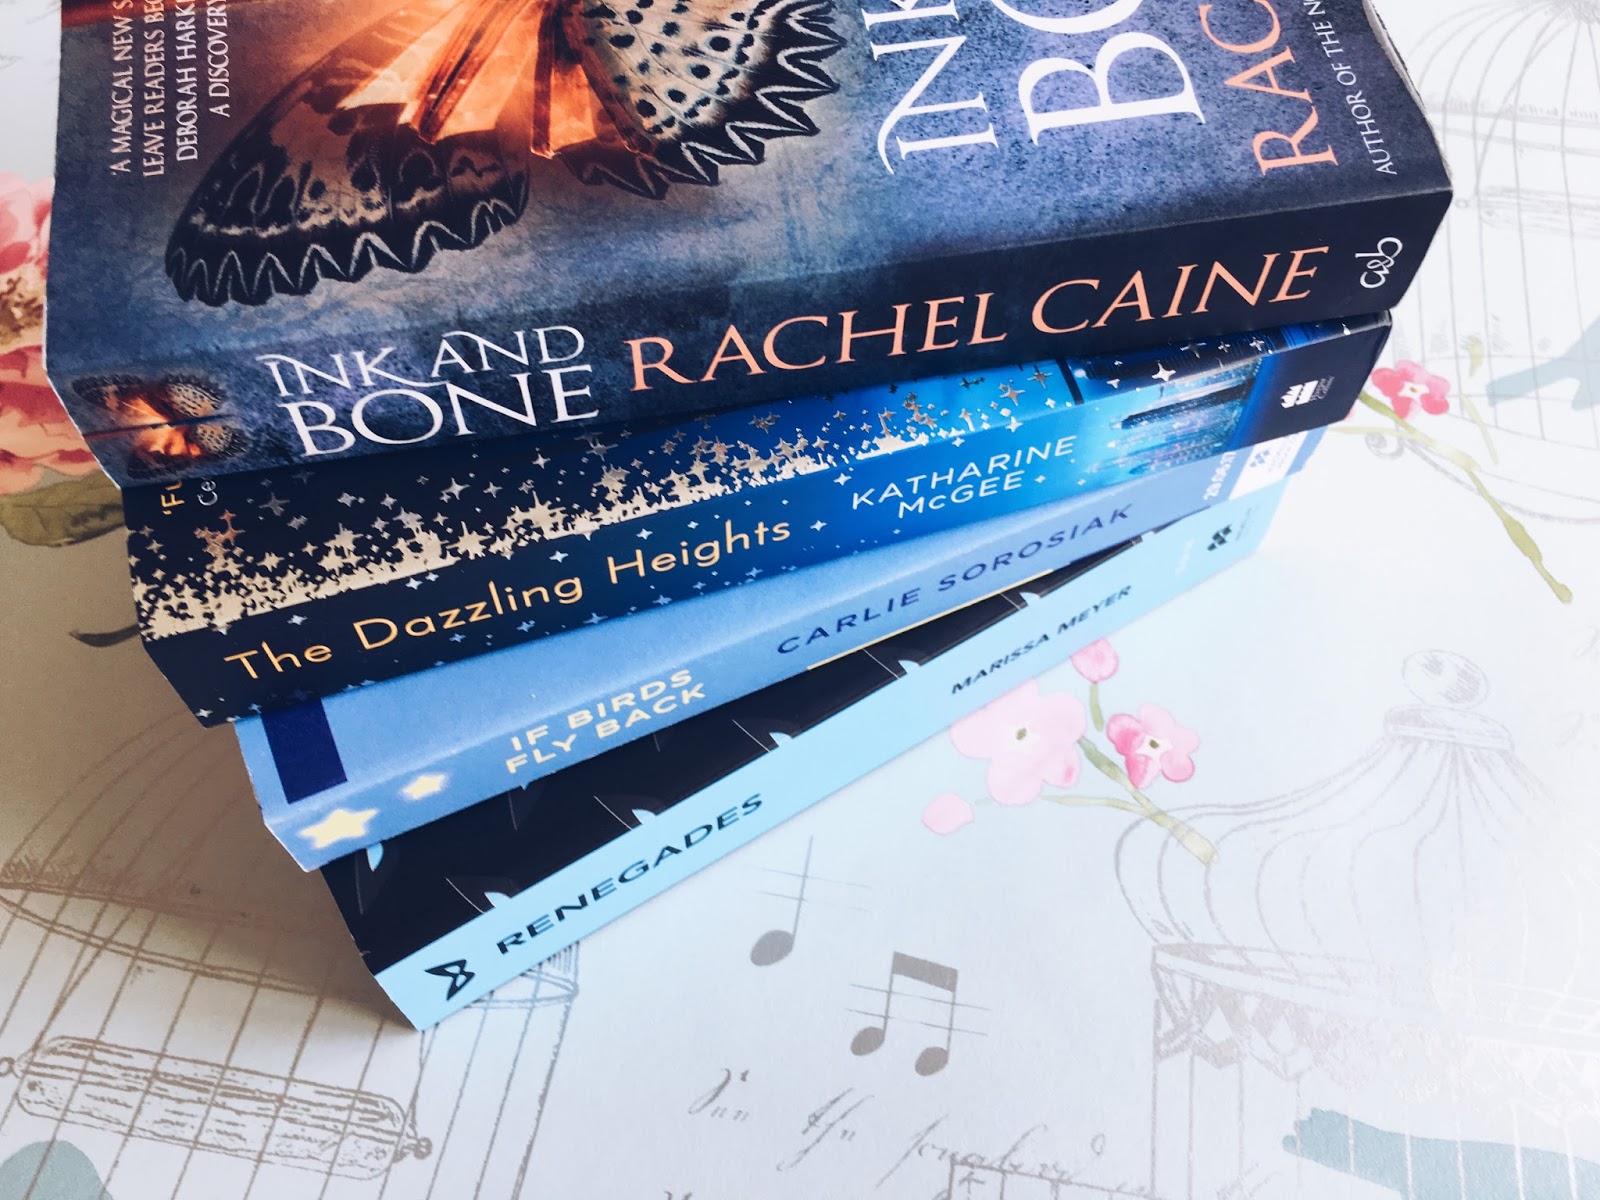 Ink and Bone (The Great Library, #1) by Rachel Caine